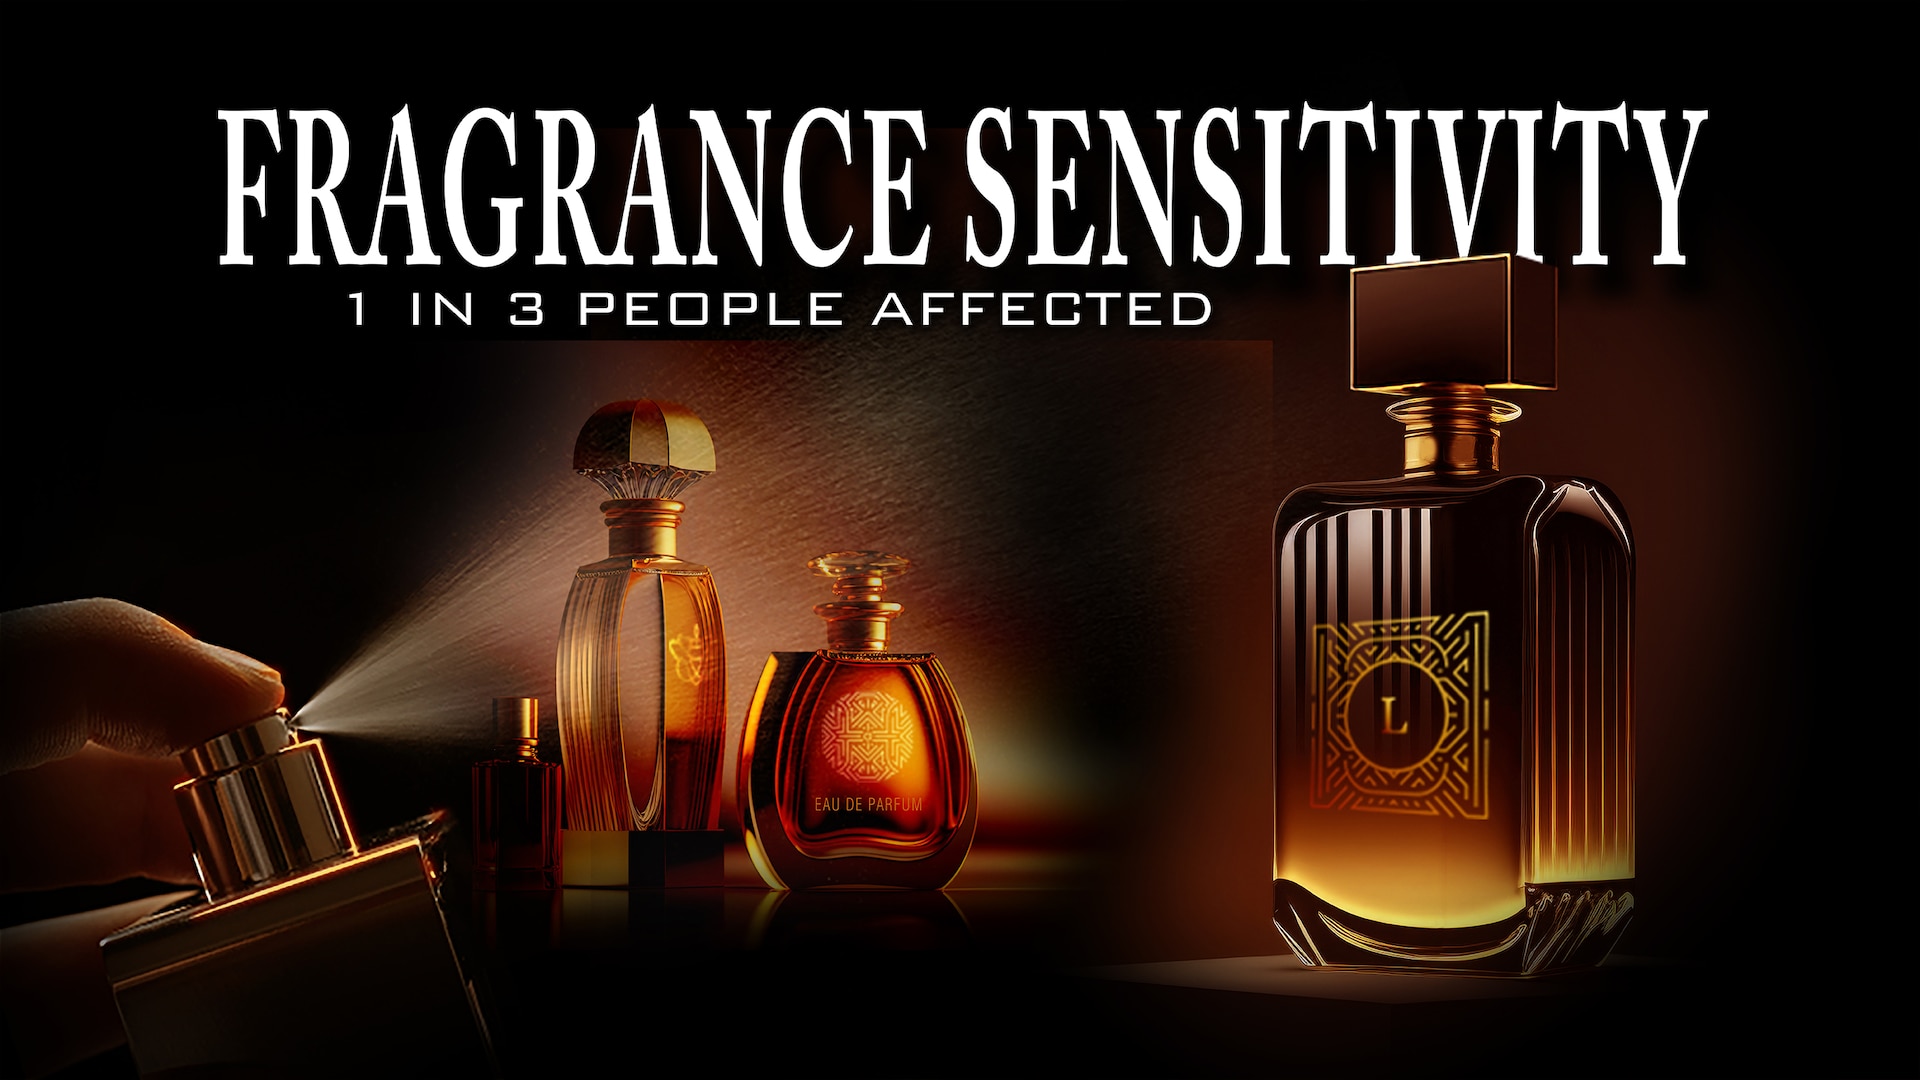 Bottle of perfume and cologne displayed against a black background, dramatically lit from behind with a perfume bottle nozzle expelling perfume mist from the lower left side and the headline Fragrance Sensitivity at the top.